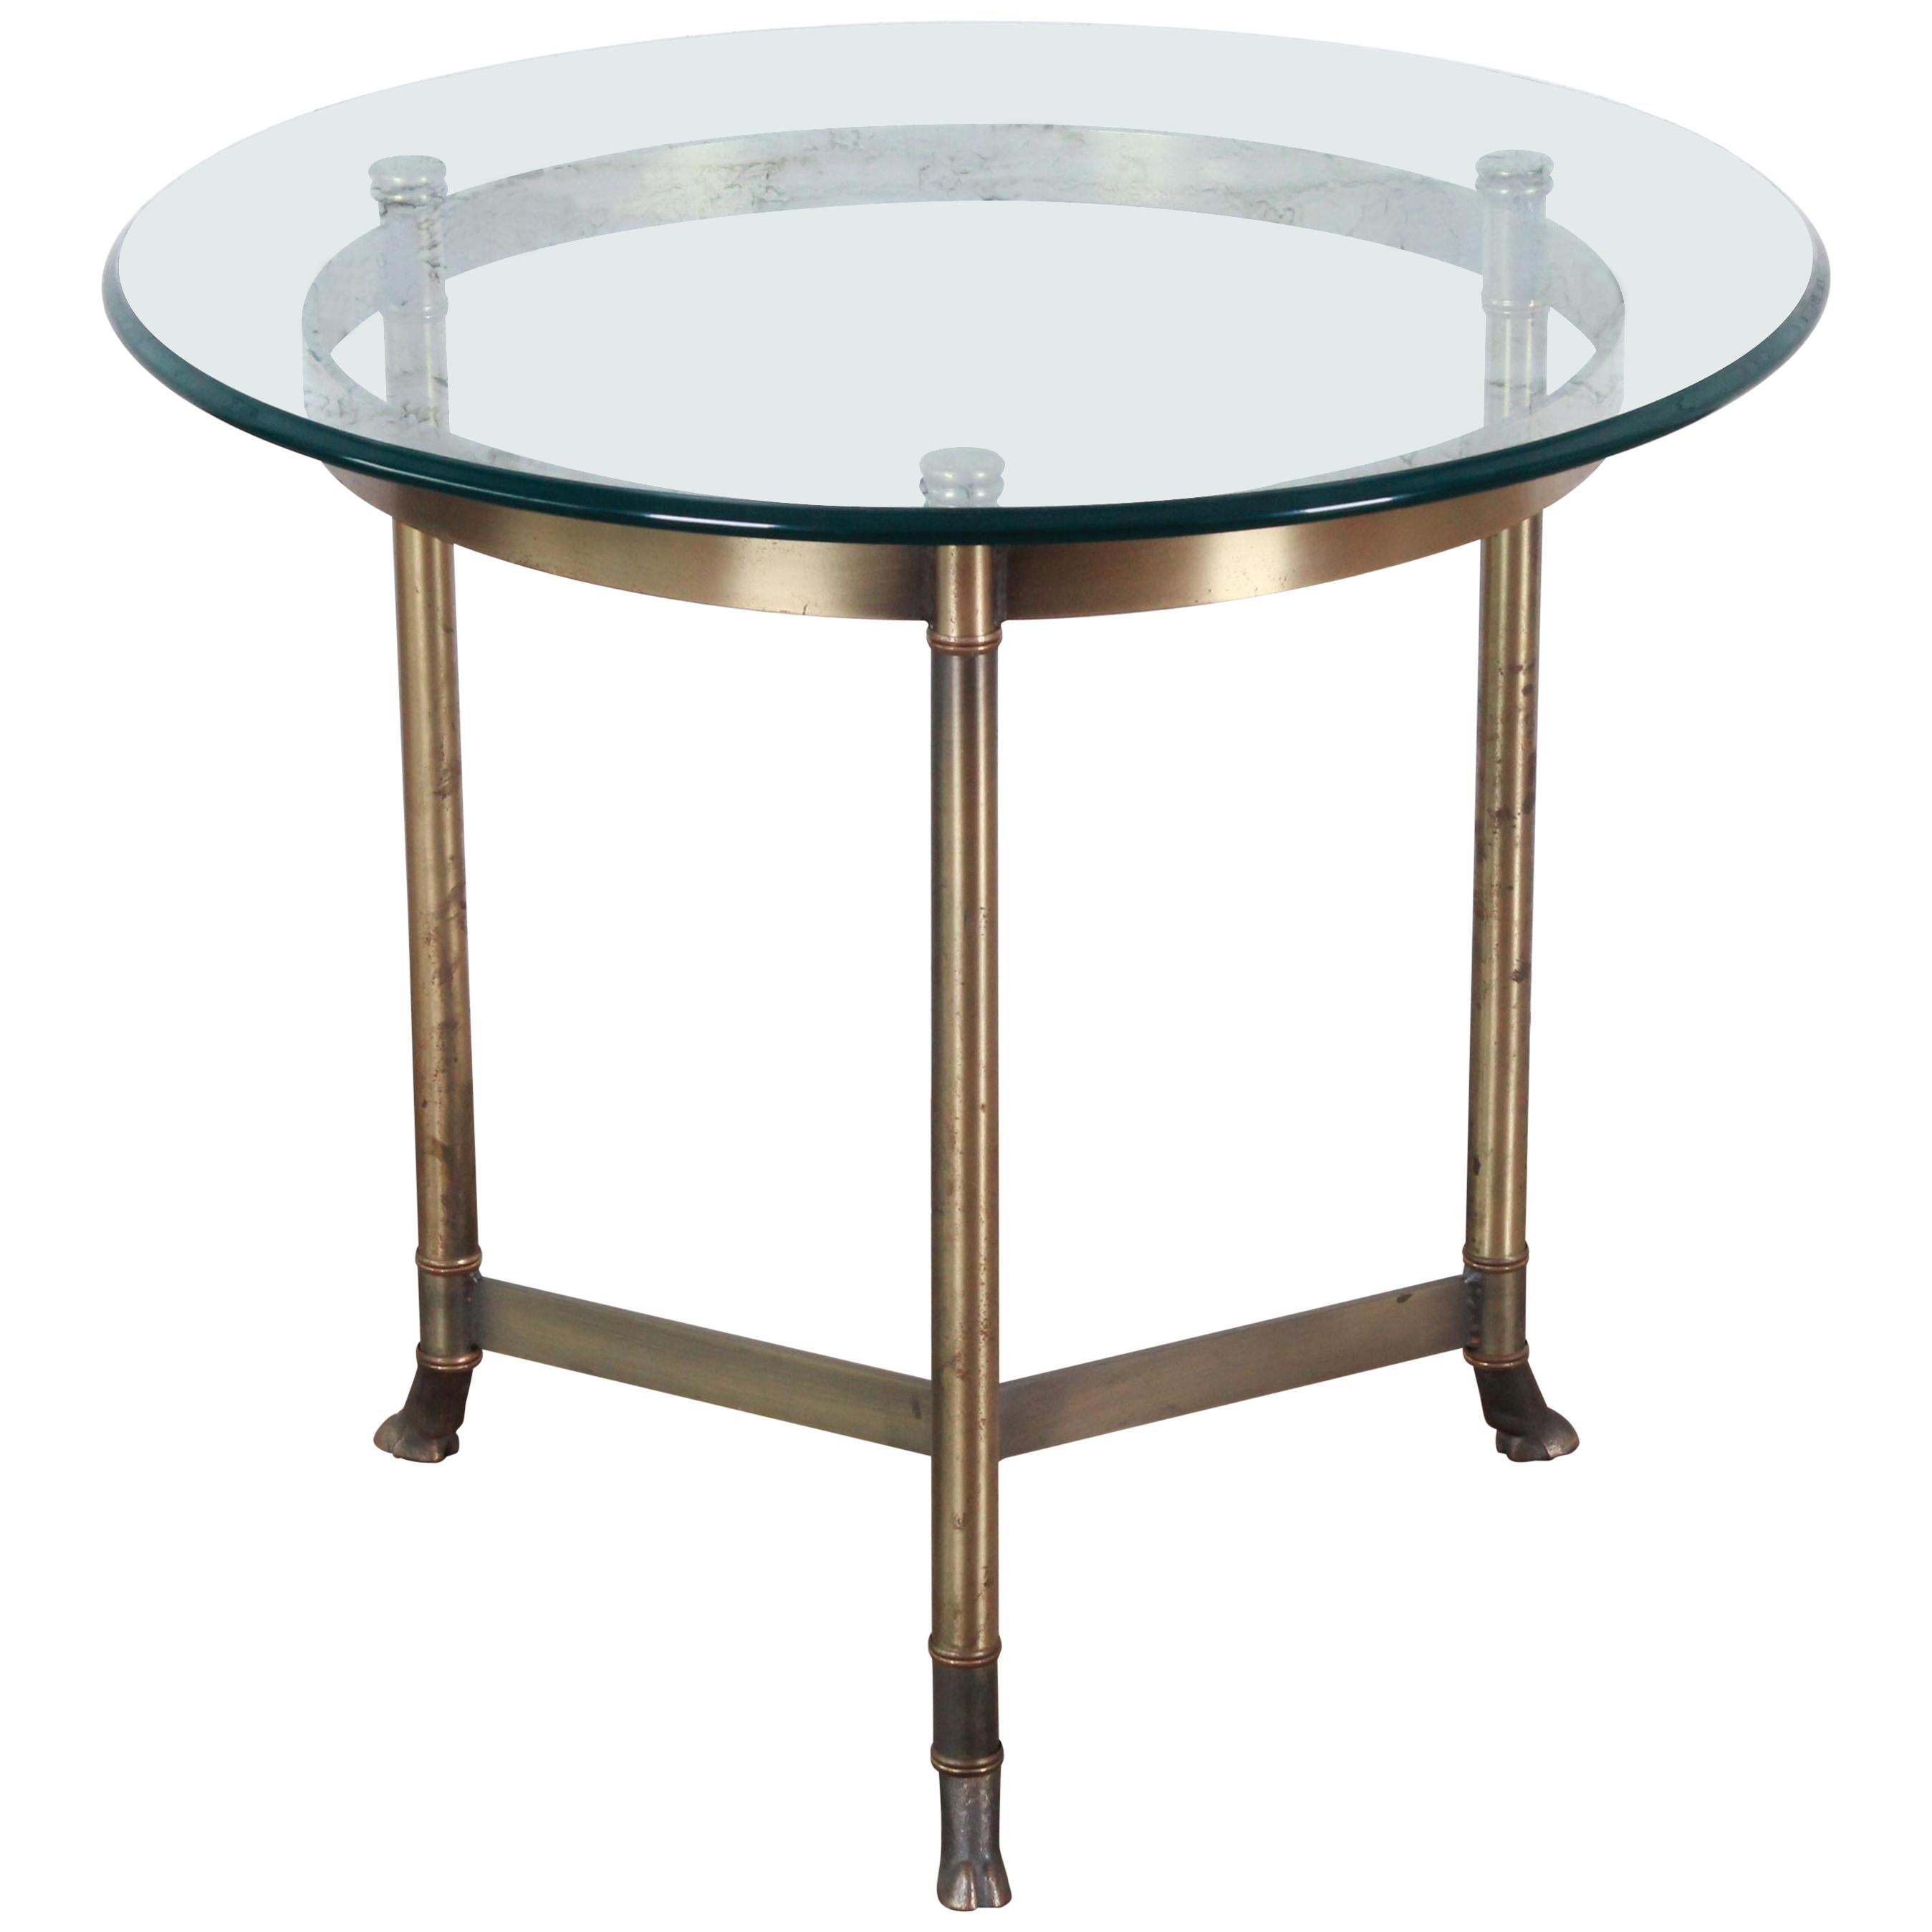 Labarge Midcentury Hollywood Regency Brass and Glass Hooved Feet Side Table